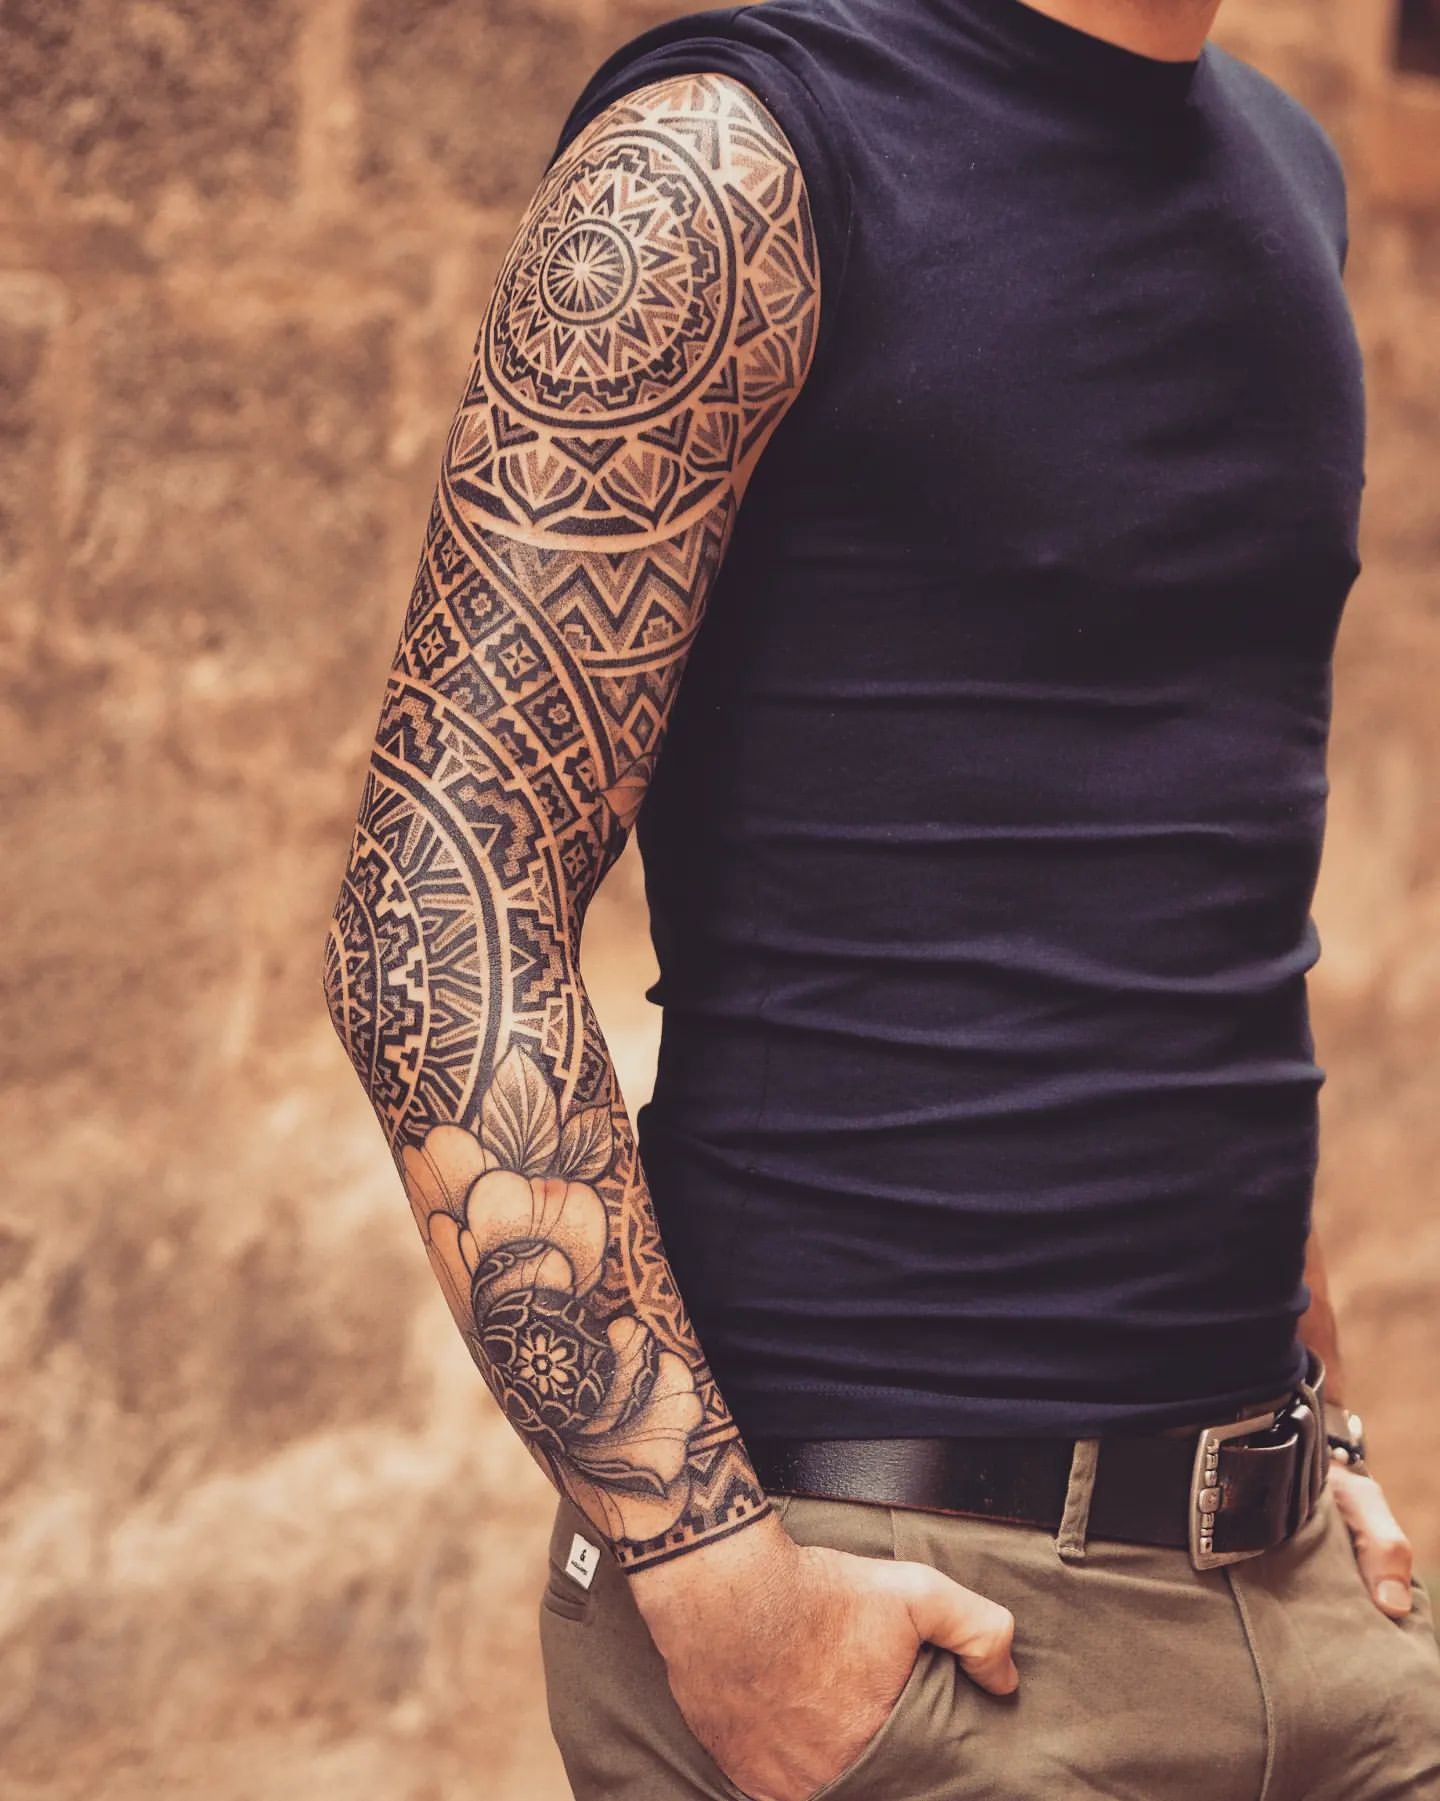 Man With Tattoos And Body Piercings High-Res Stock Photo - Getty Images